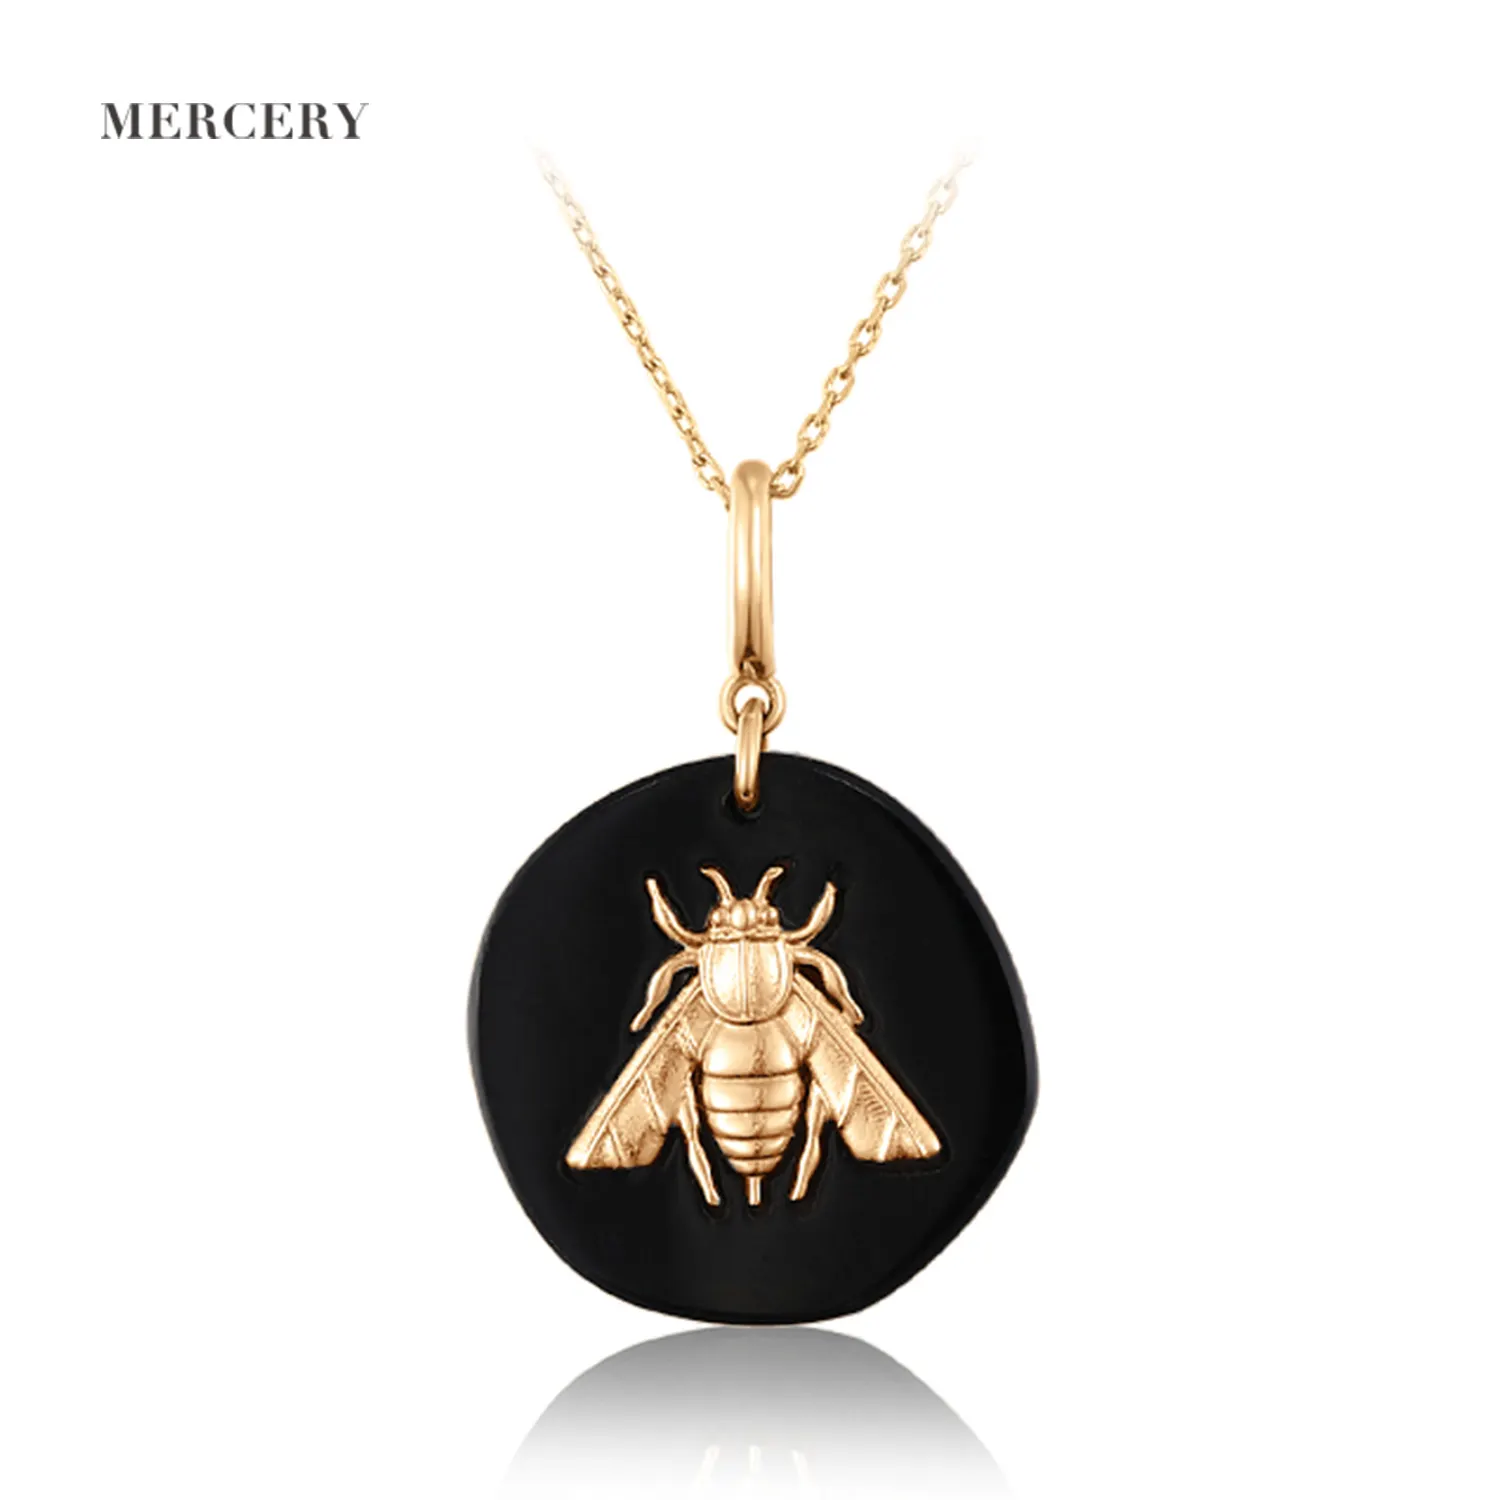 Mercery 2022 Fashion Jewelry New Arrivals Cute Bee Pattern Pendant Necklace 14K Solid Gold Necklace Women Fine Jewelry